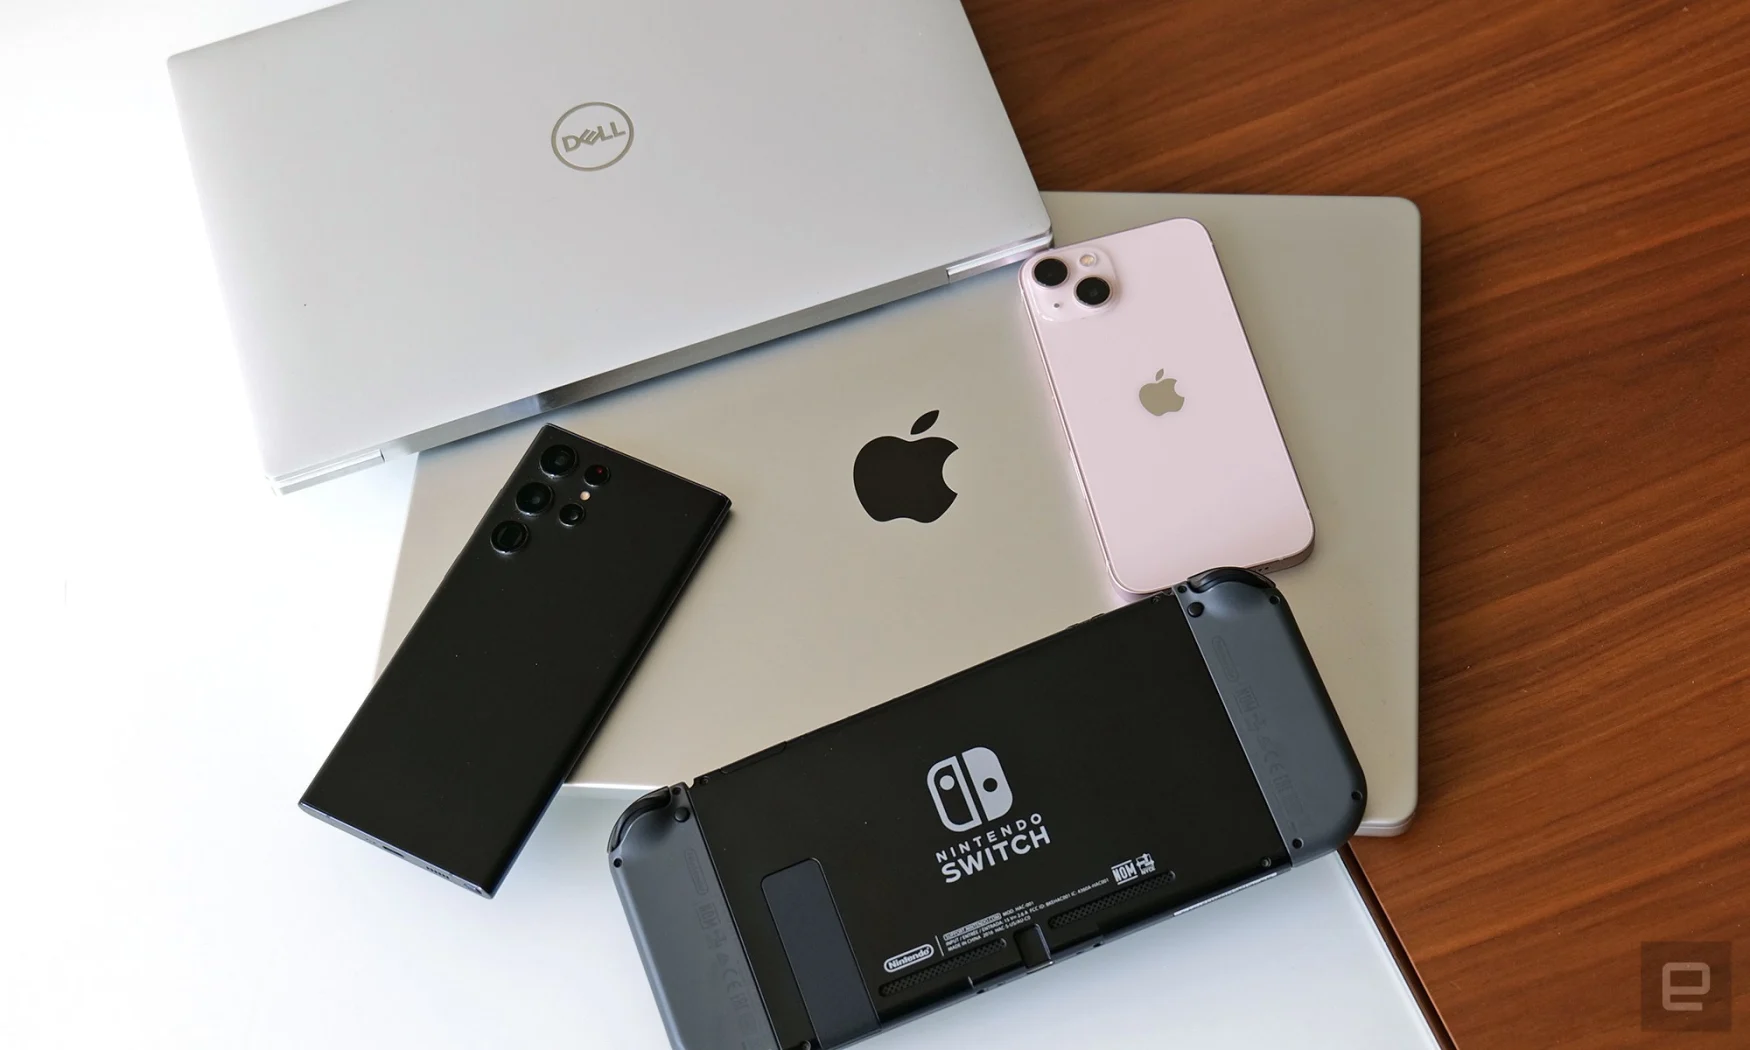 The five devices we used to test the chargers are the iPhone 13, a Galaxy S22 Ultra, a Nintendo Switch (a launch model from 2017), a 2021 Dell XPS 13 and a 16-inch M1 Max MacBook Pro.